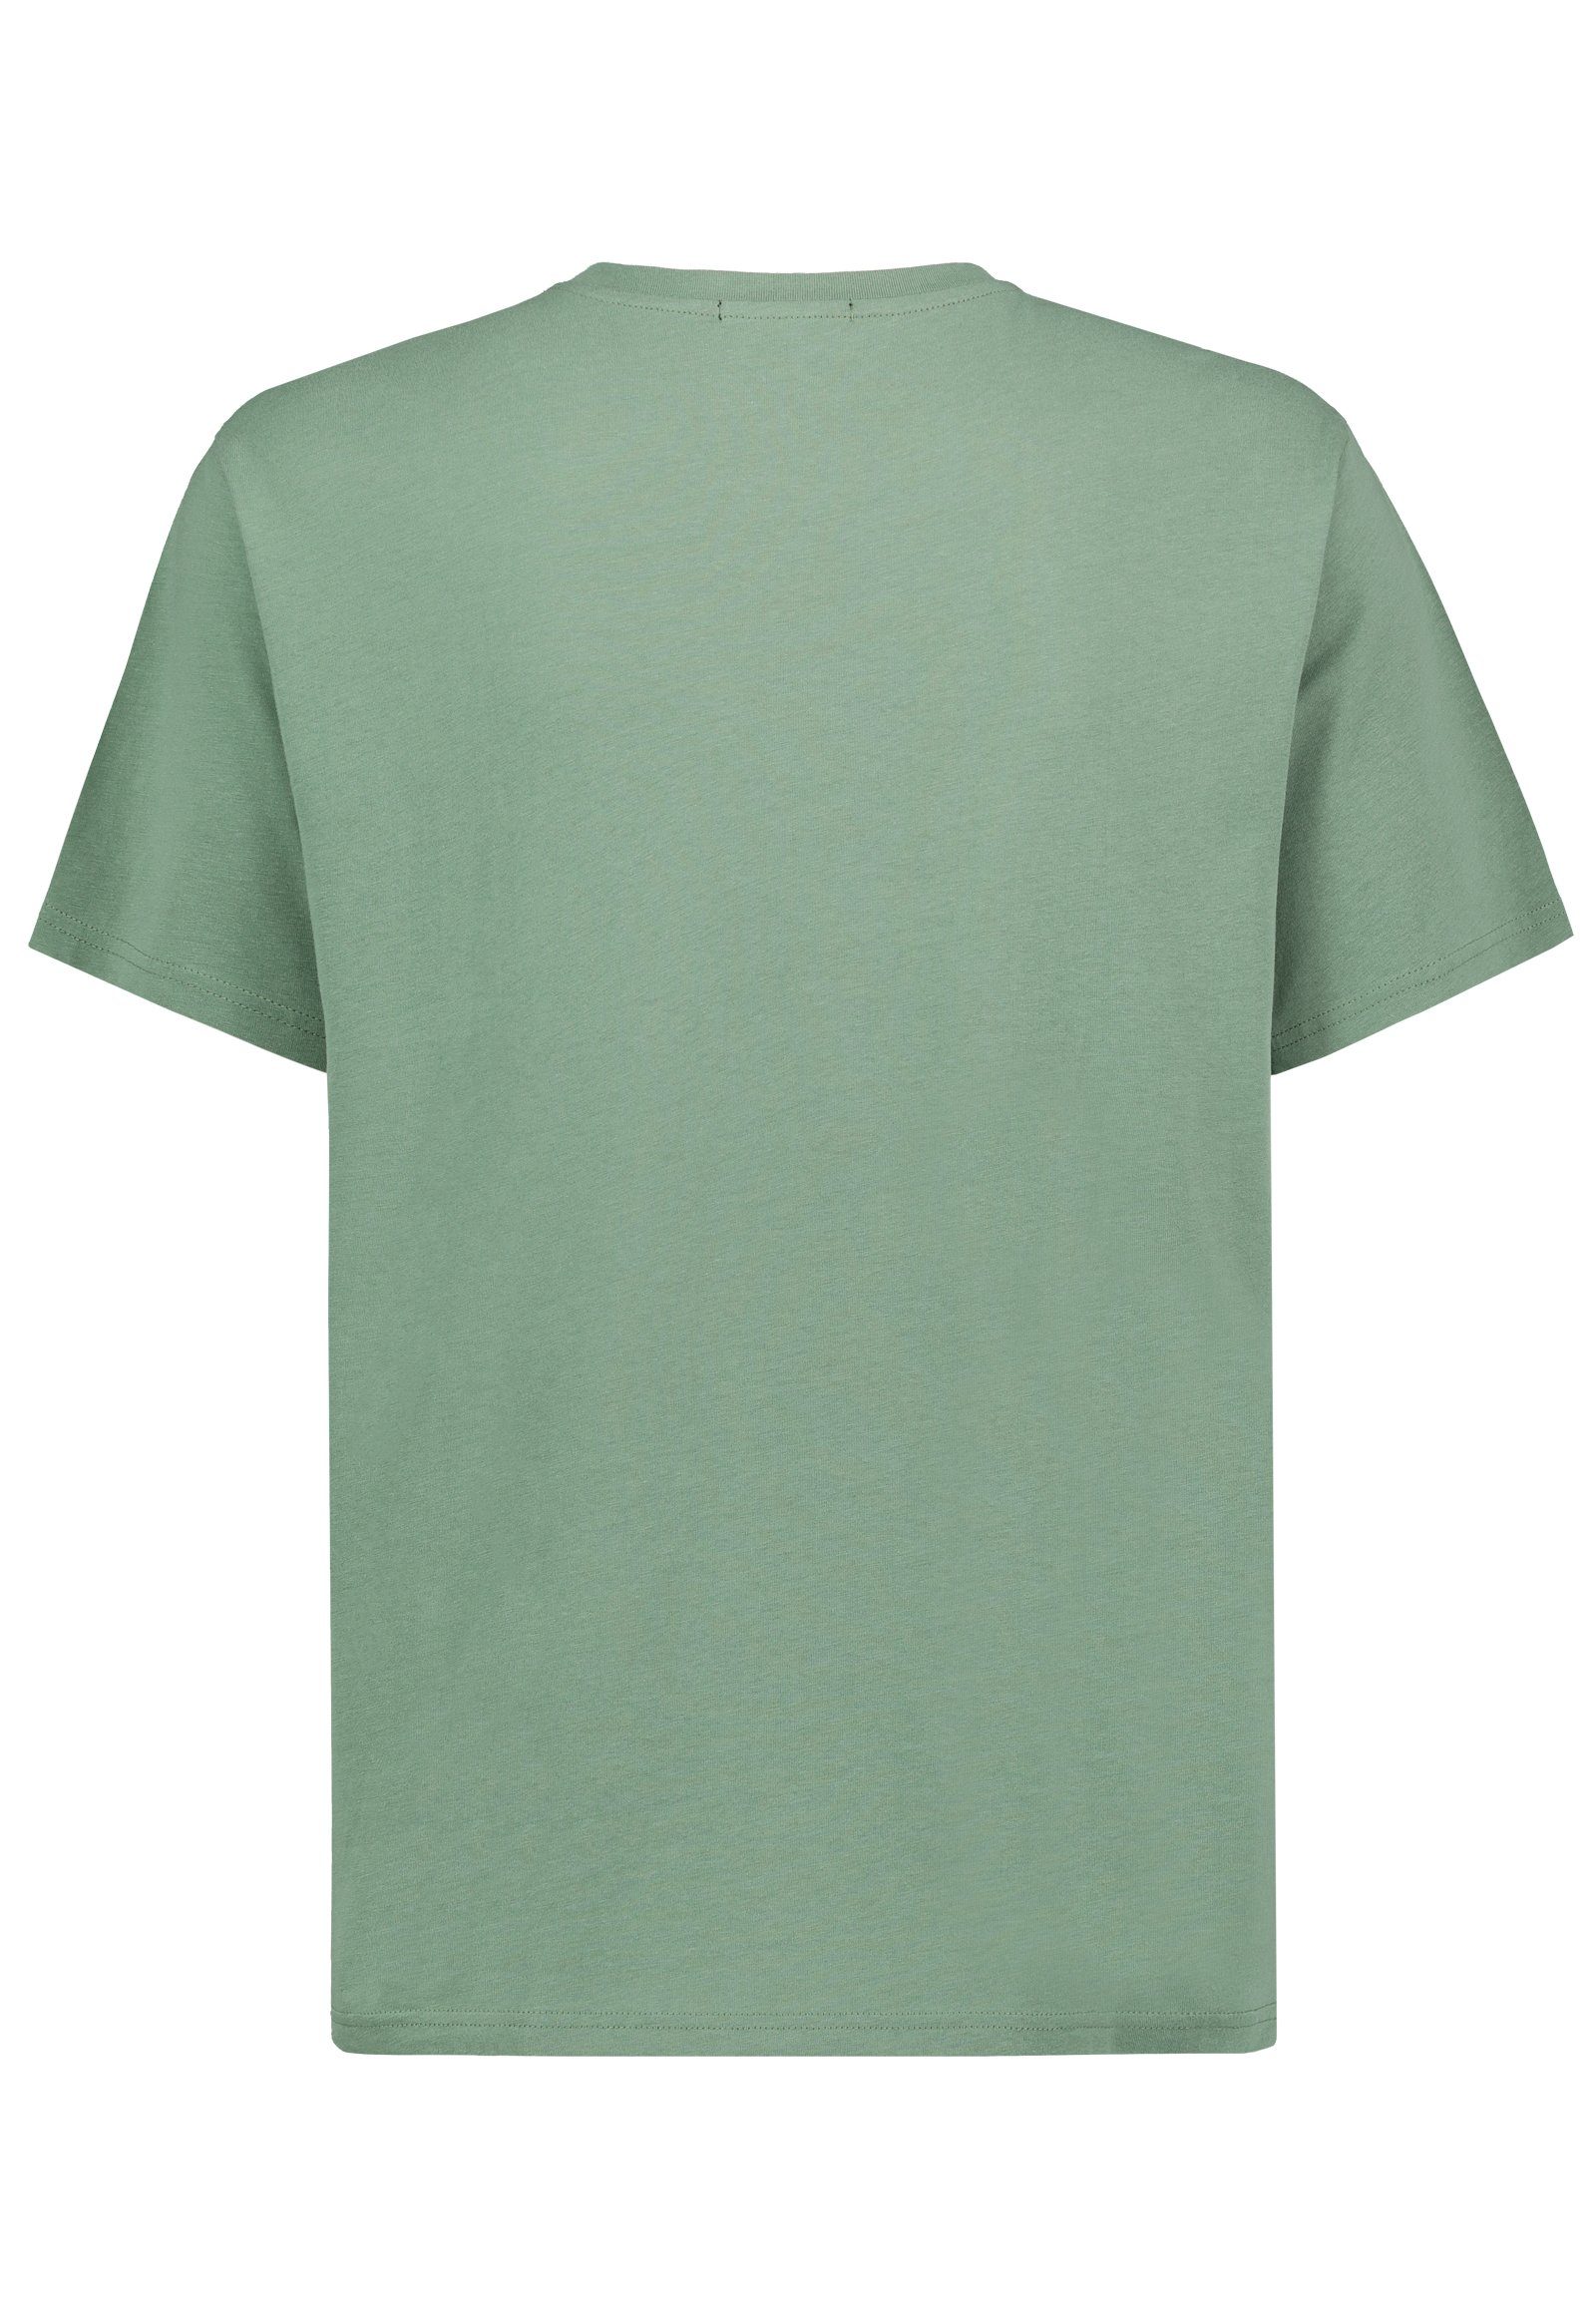 mit T-Shirt T-Shirt Print SUBLEVEL Sommer green